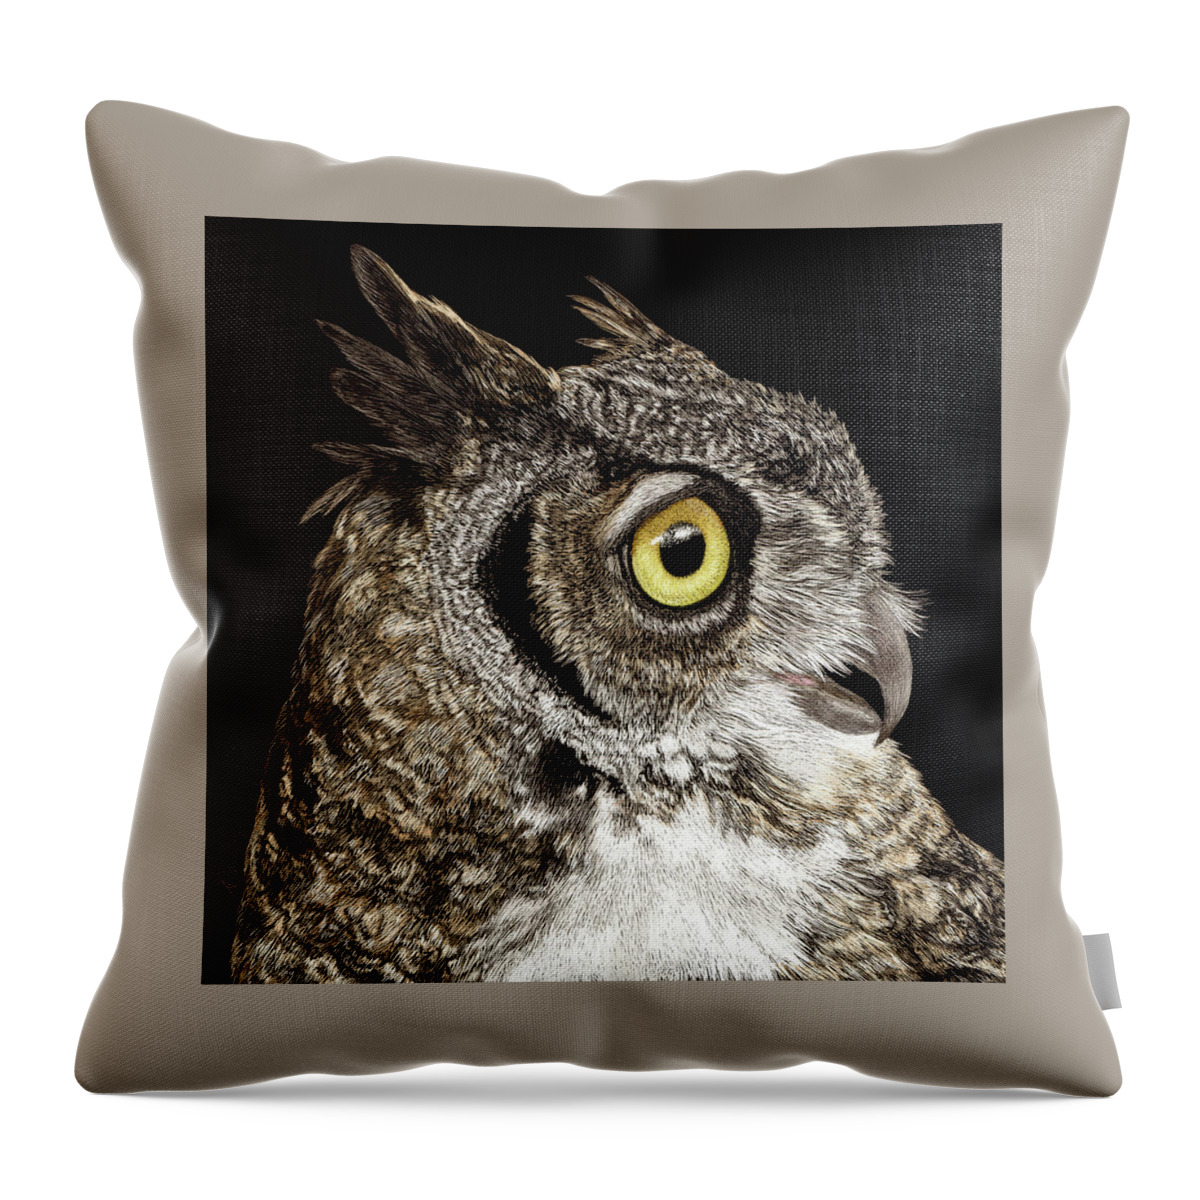 Owl Throw Pillow featuring the drawing Great-horned Owl by Ann Ranlett